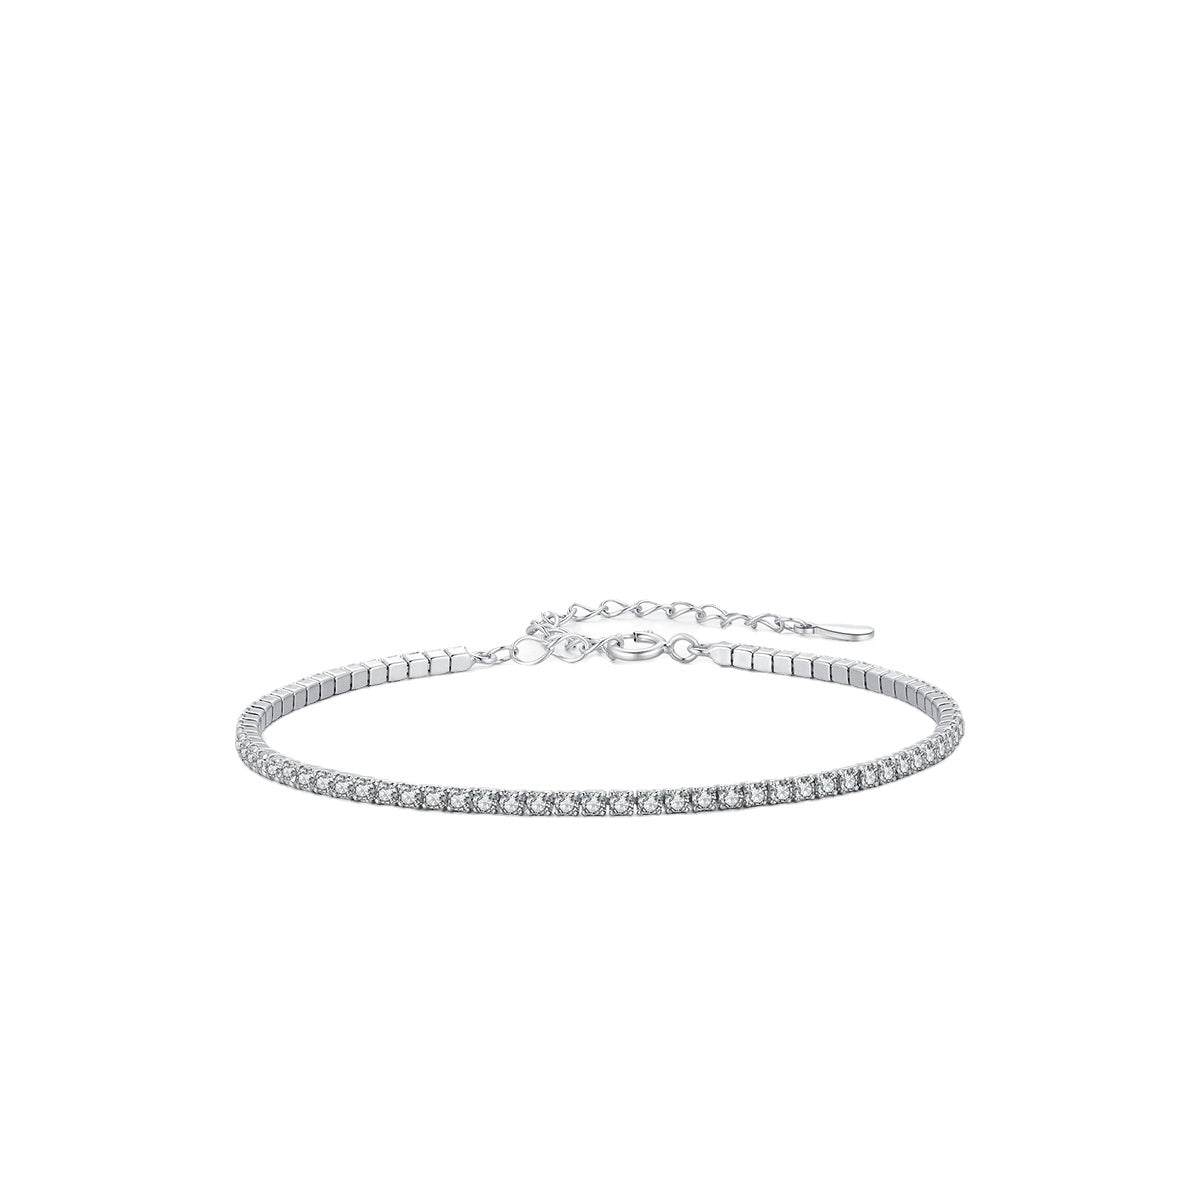 Exquisite S925 Sterling Silver Bracelet with Zircon Sparkle for Women's Summer Style